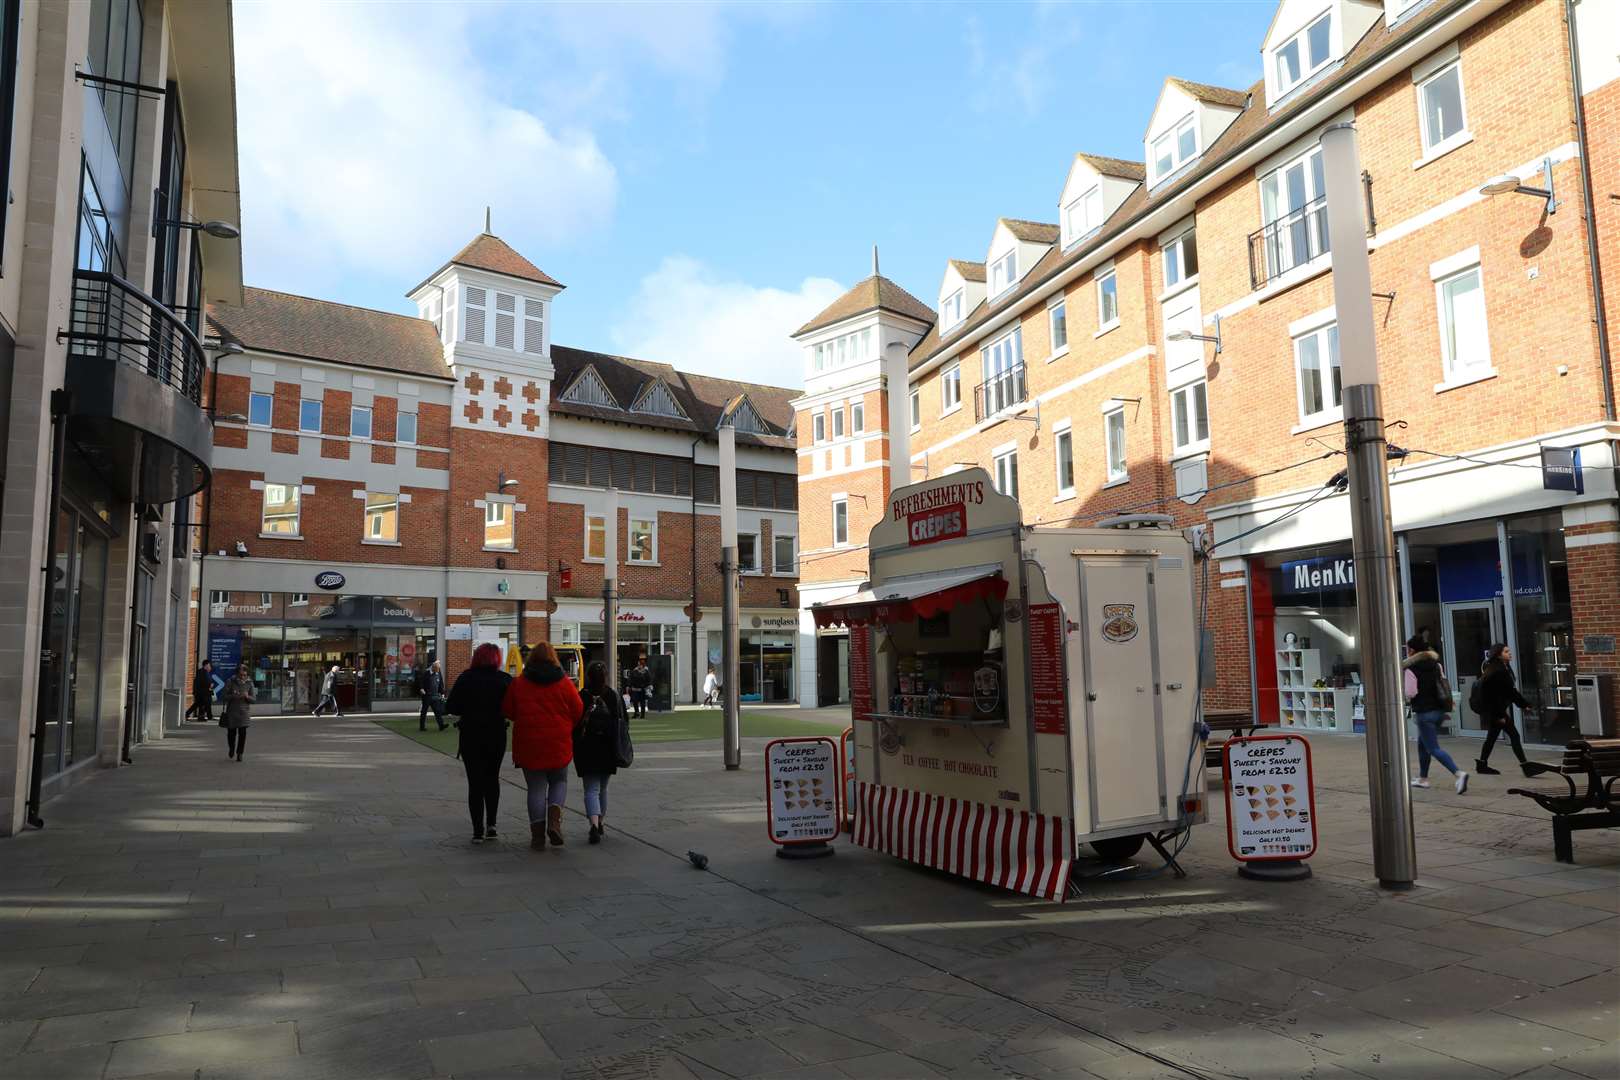 Whitefriars is Canterbury's main shopping area